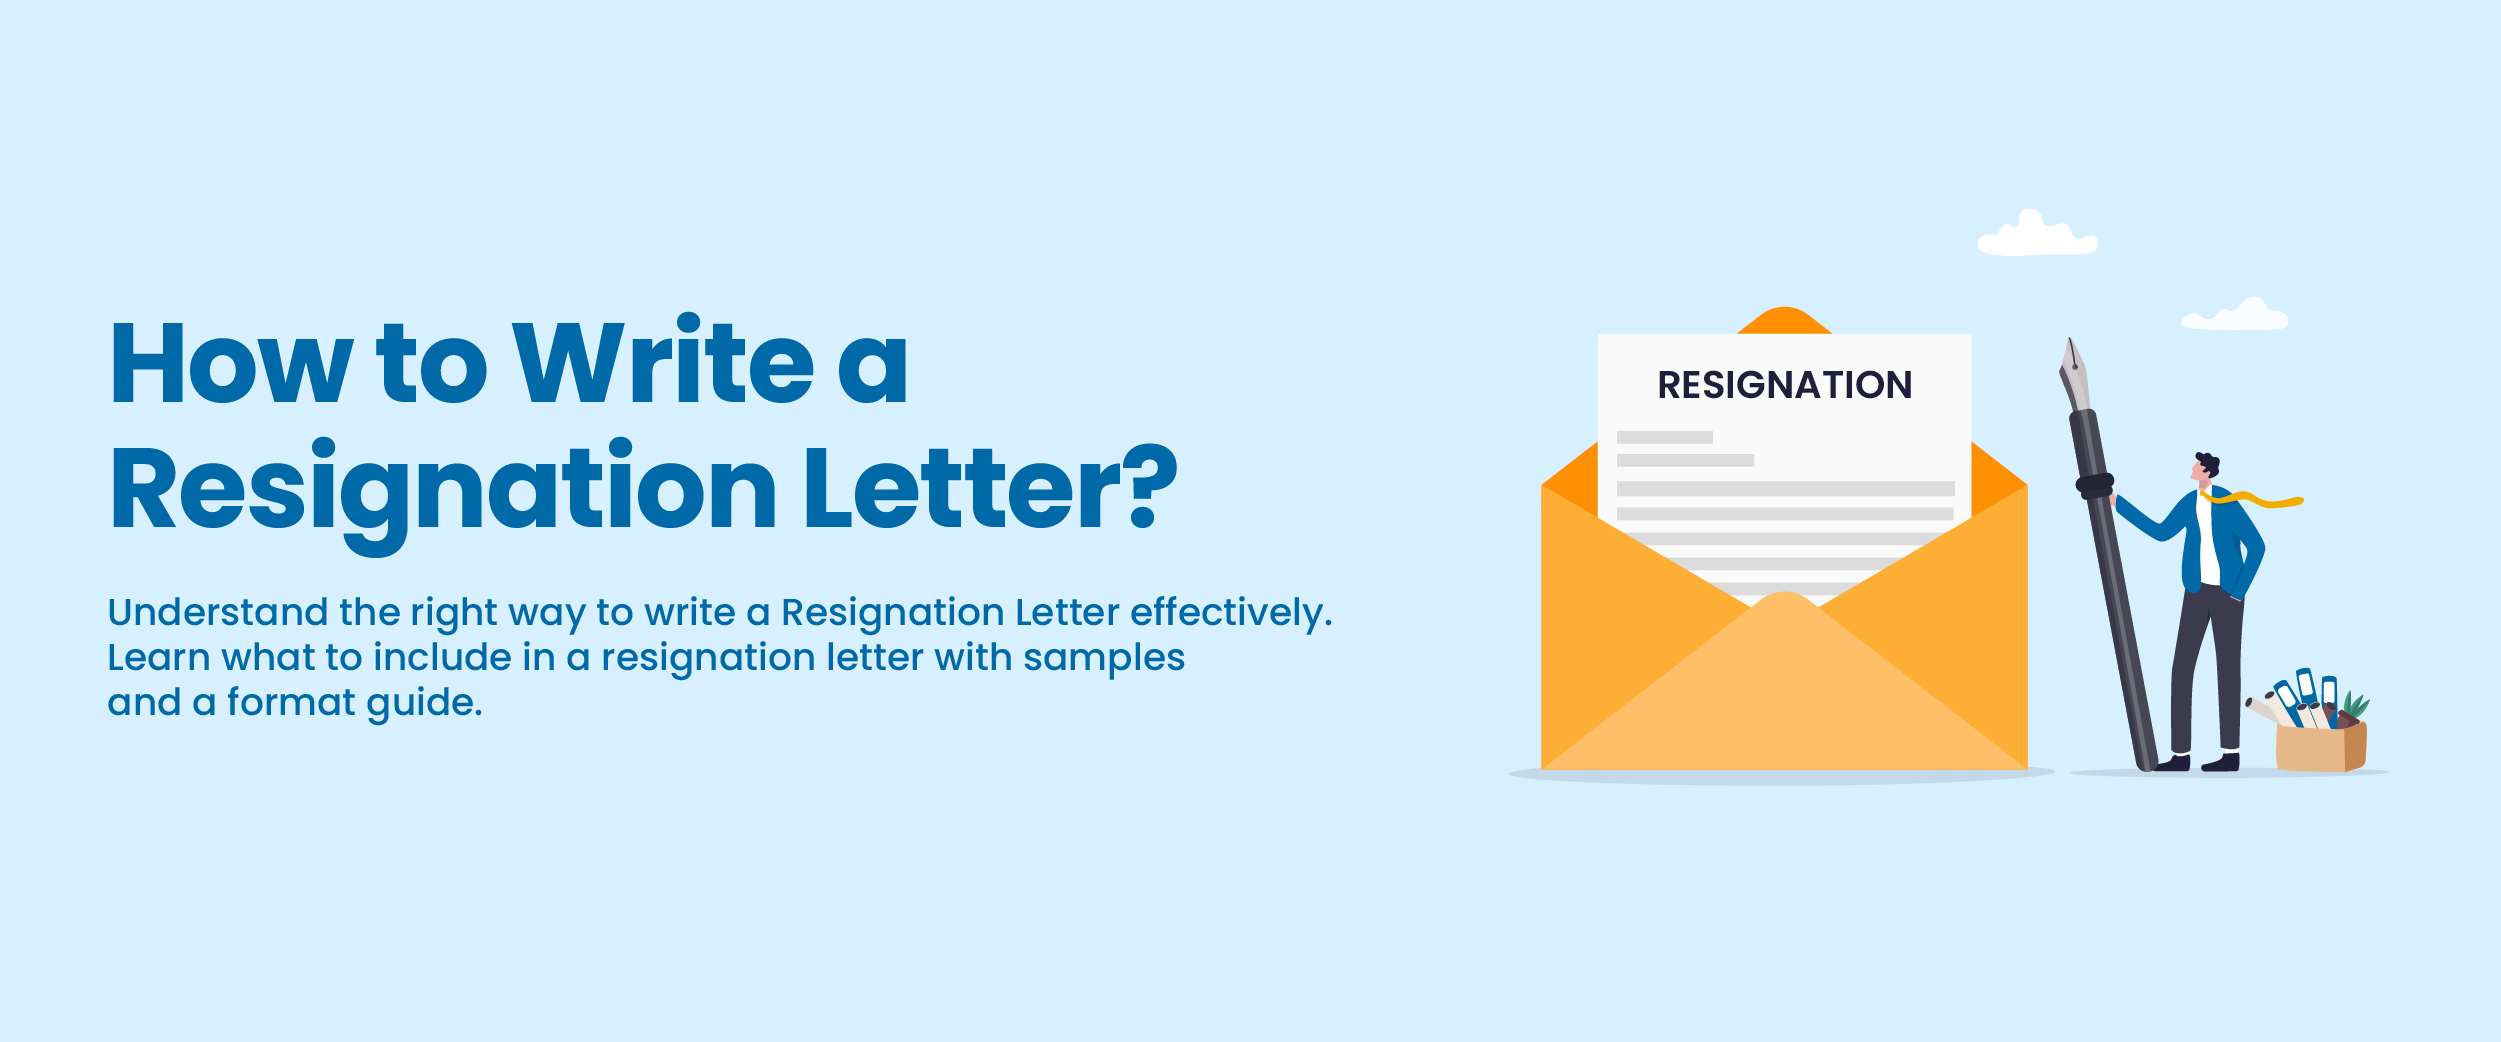 How to Write a Resignation Letter for Job